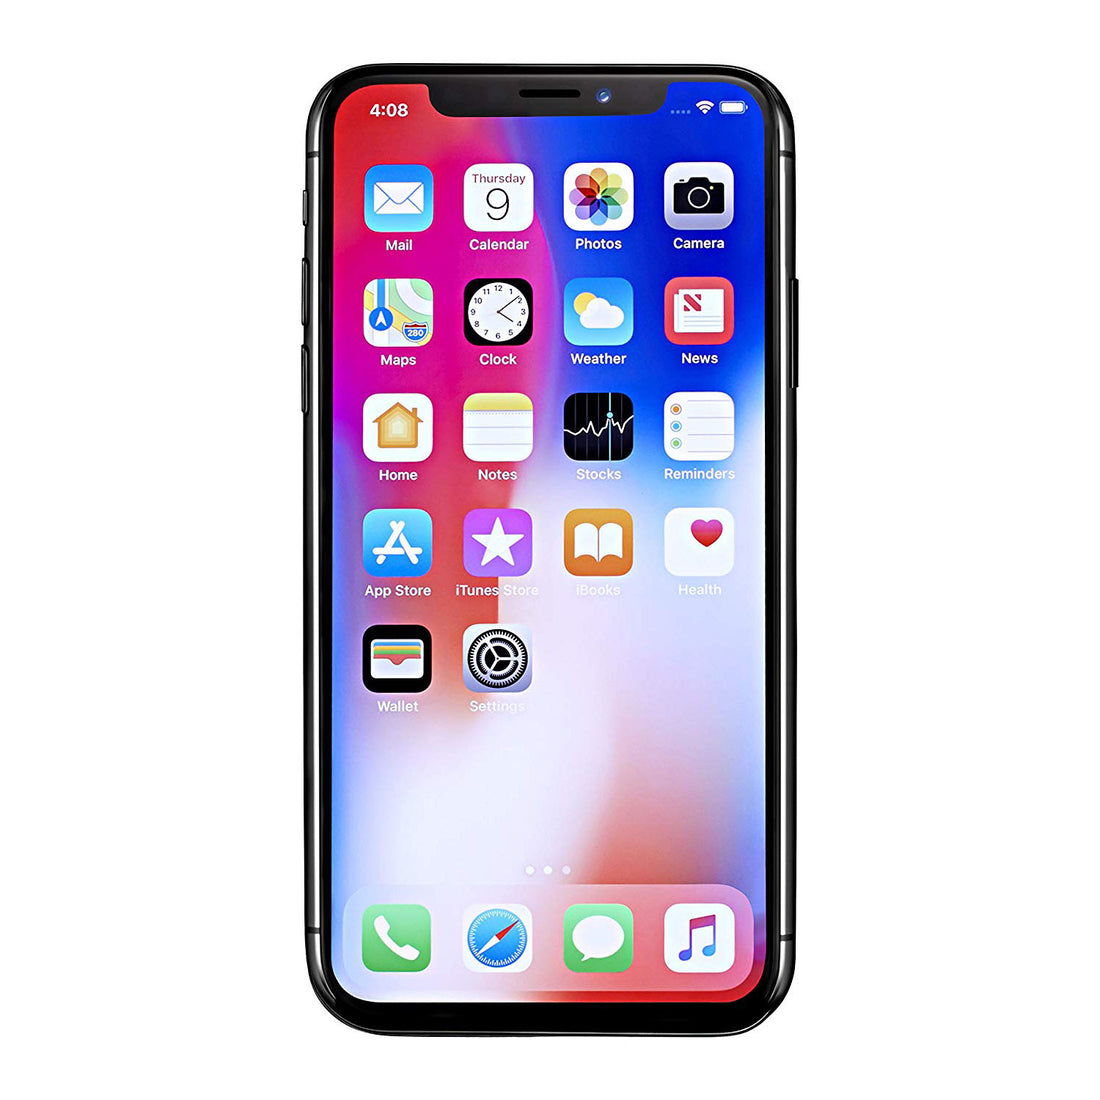 Apple iPhone X Smartphone, 5.8-Inch, 256GB, Unlocked All Carriers - Space Gray (Refurbished)